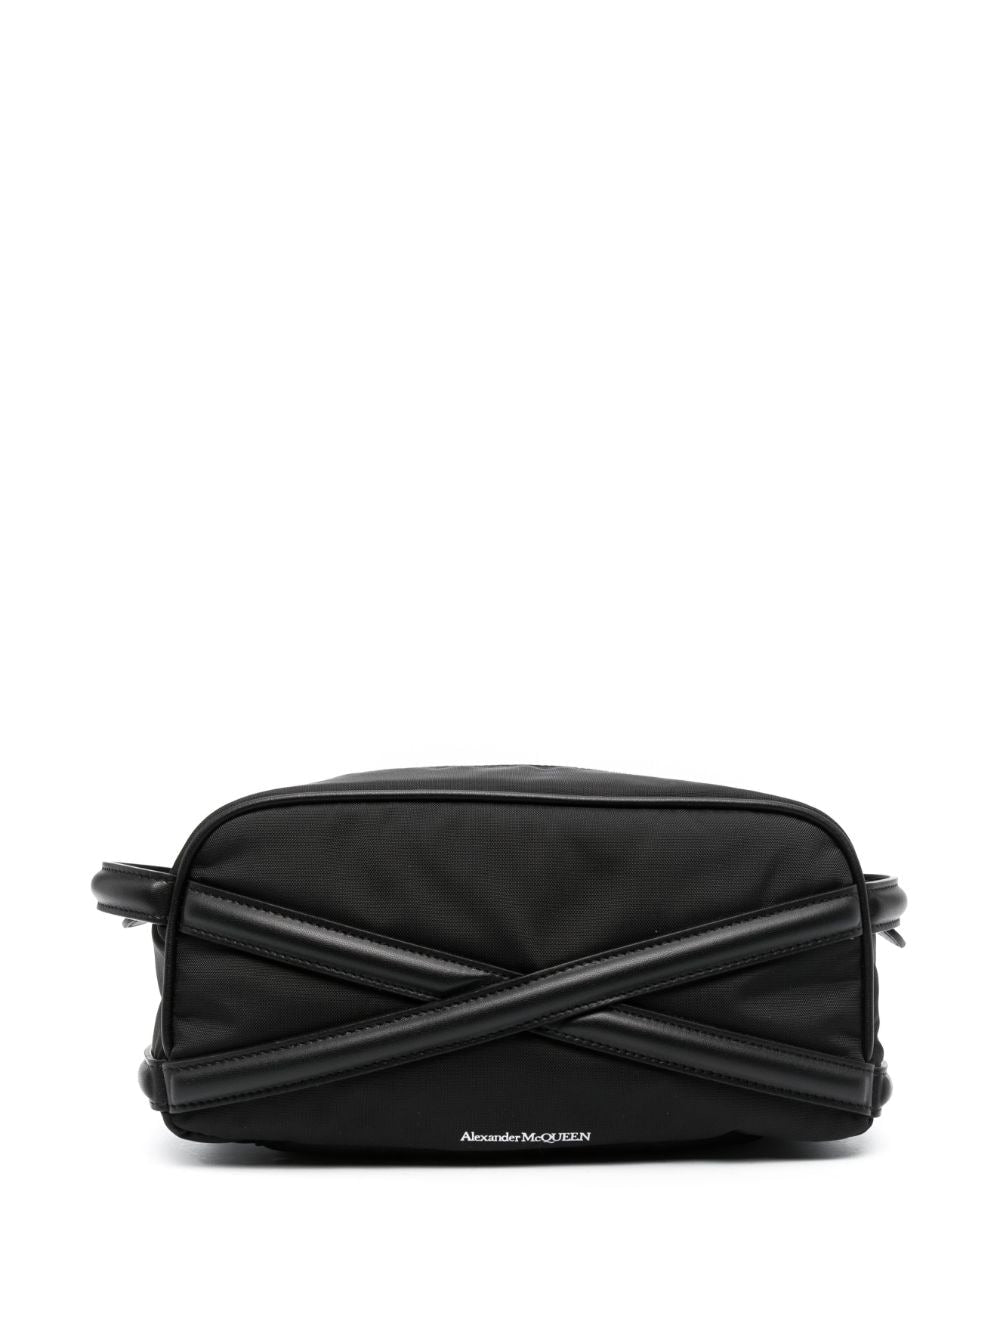 ALEXANDER MCQUEEN Men's Black Leather Harness Wash Bag - FW23 Collection